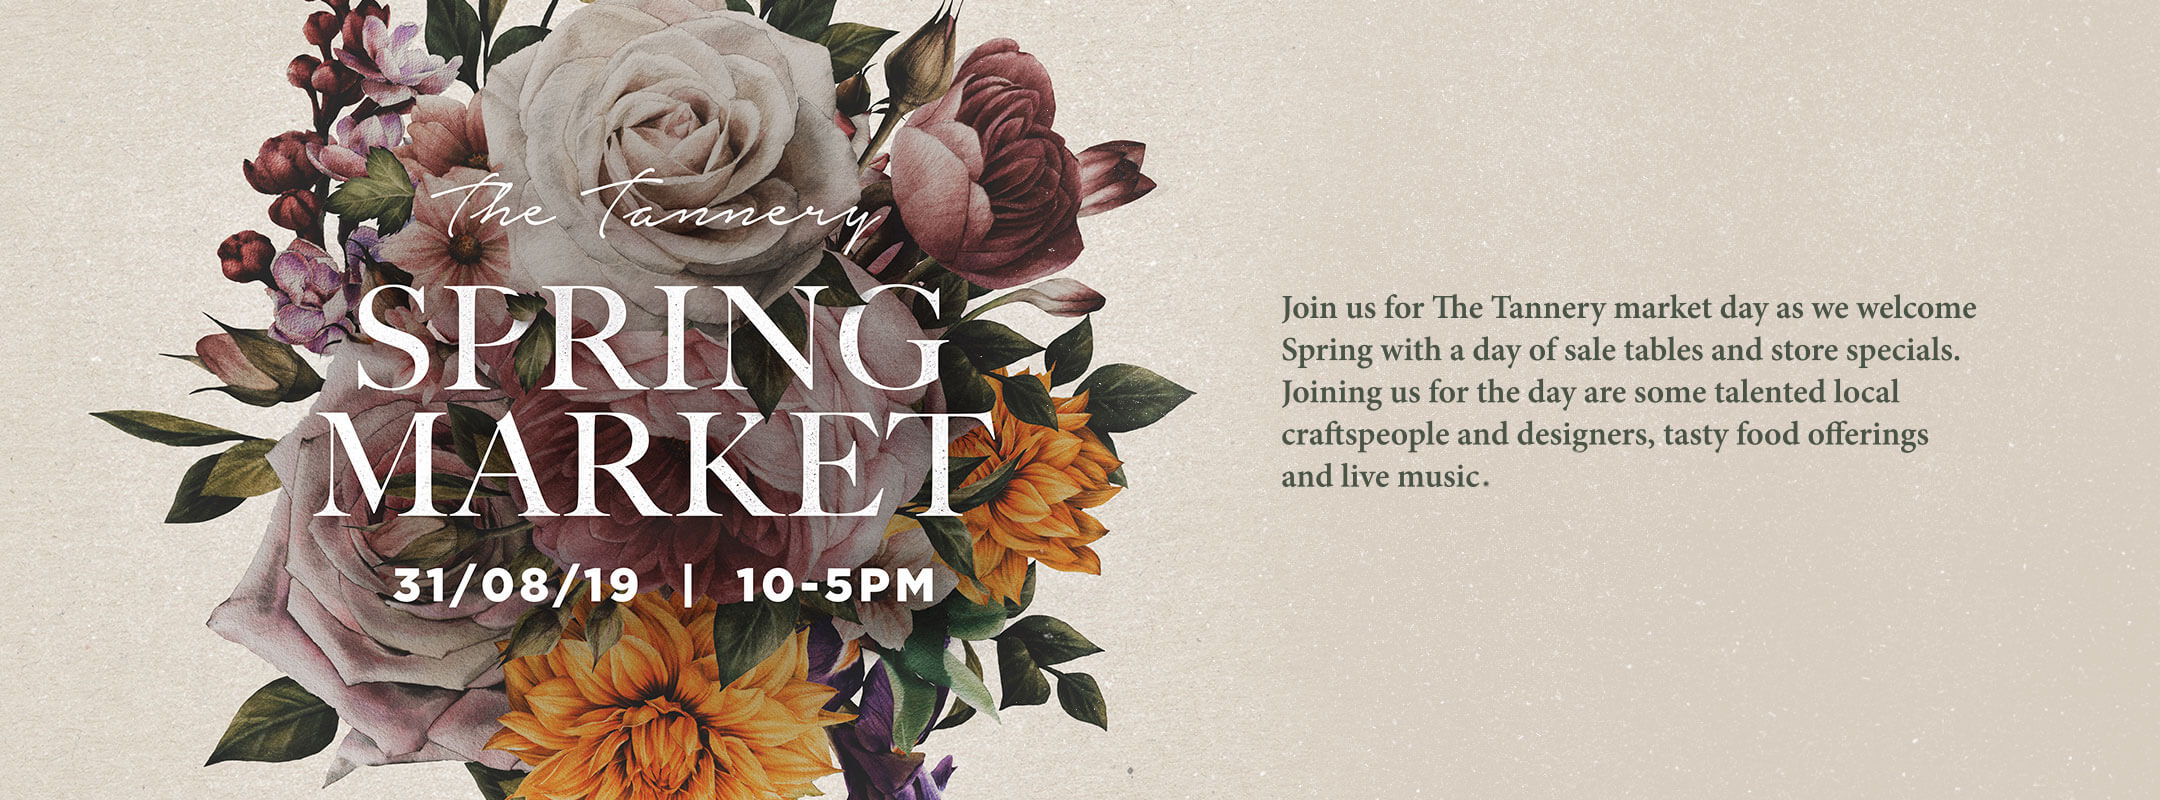 The Tannery SPRING Market Day 2019